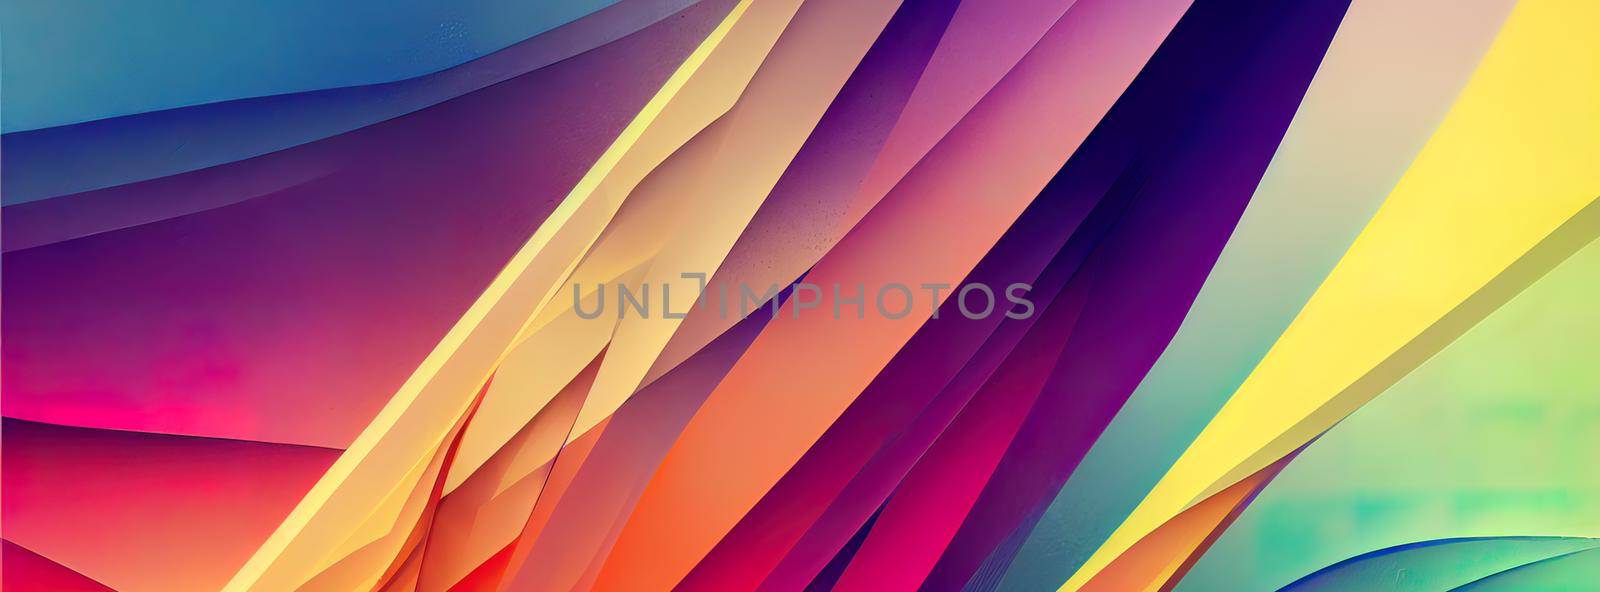 Smooth colorful template banner with gradient color. Design with liquid shape abstract background modern by FokasuArt